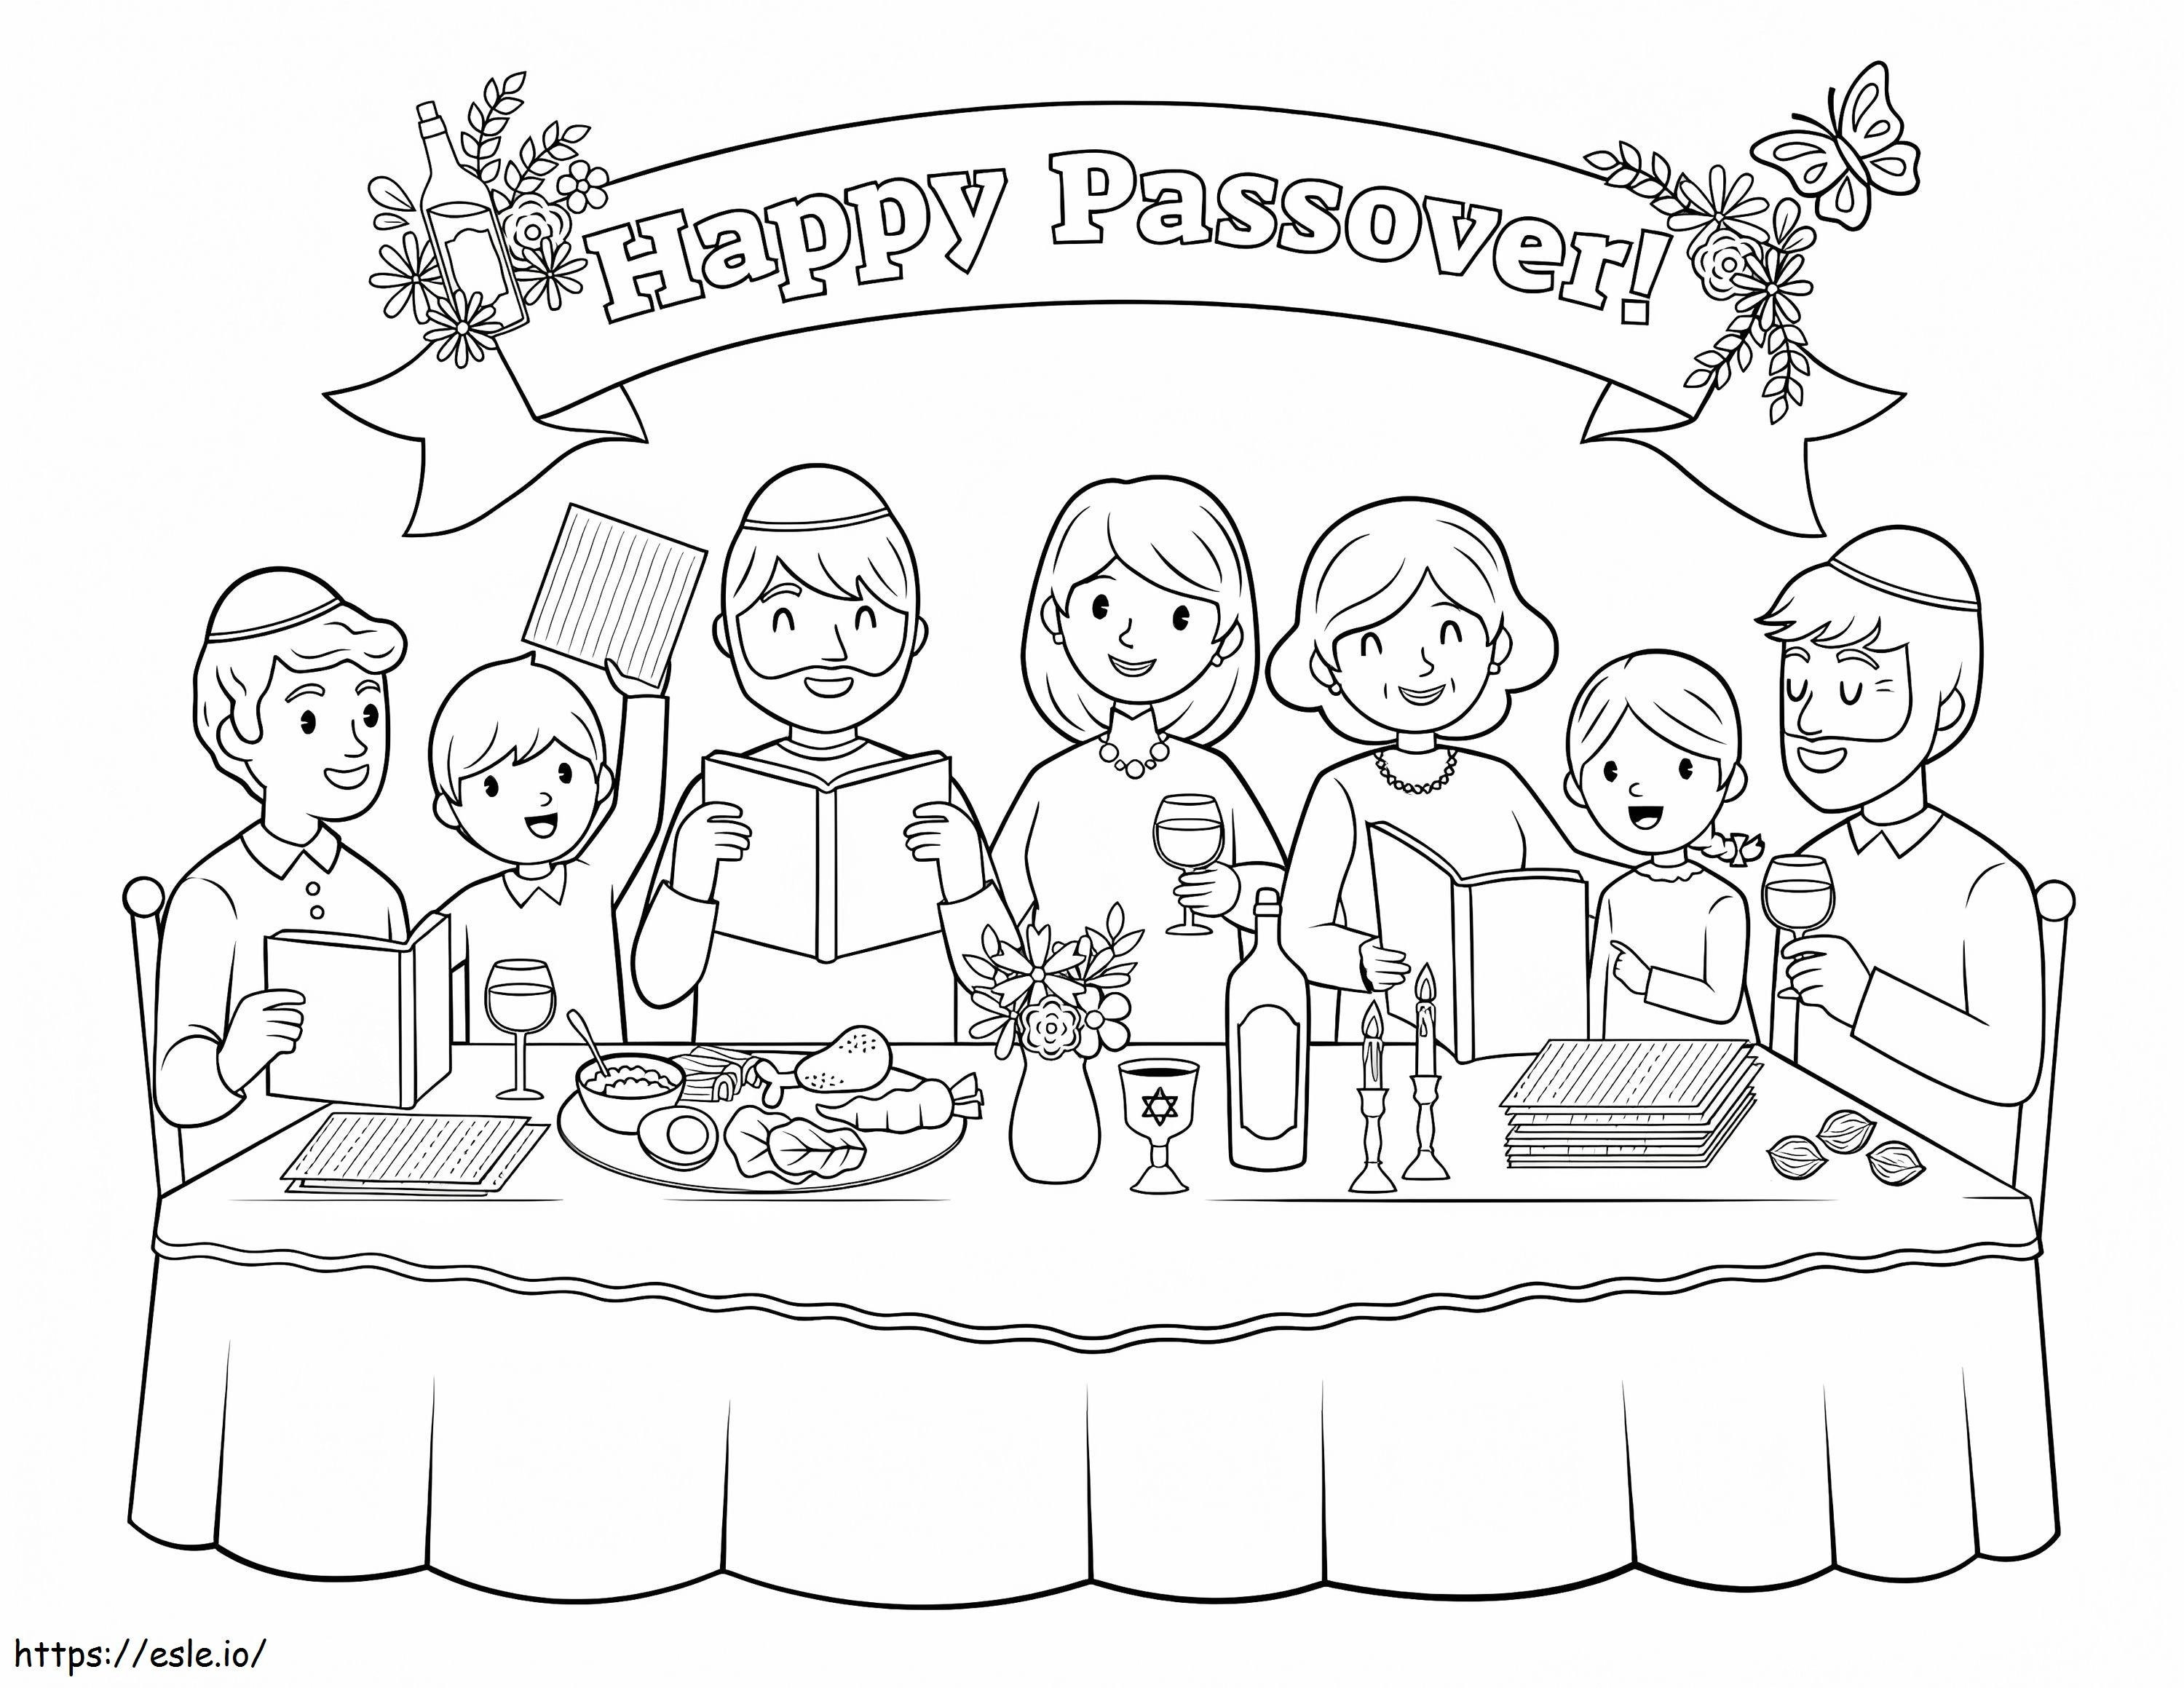 Happy Passover Coloring Page coloring page